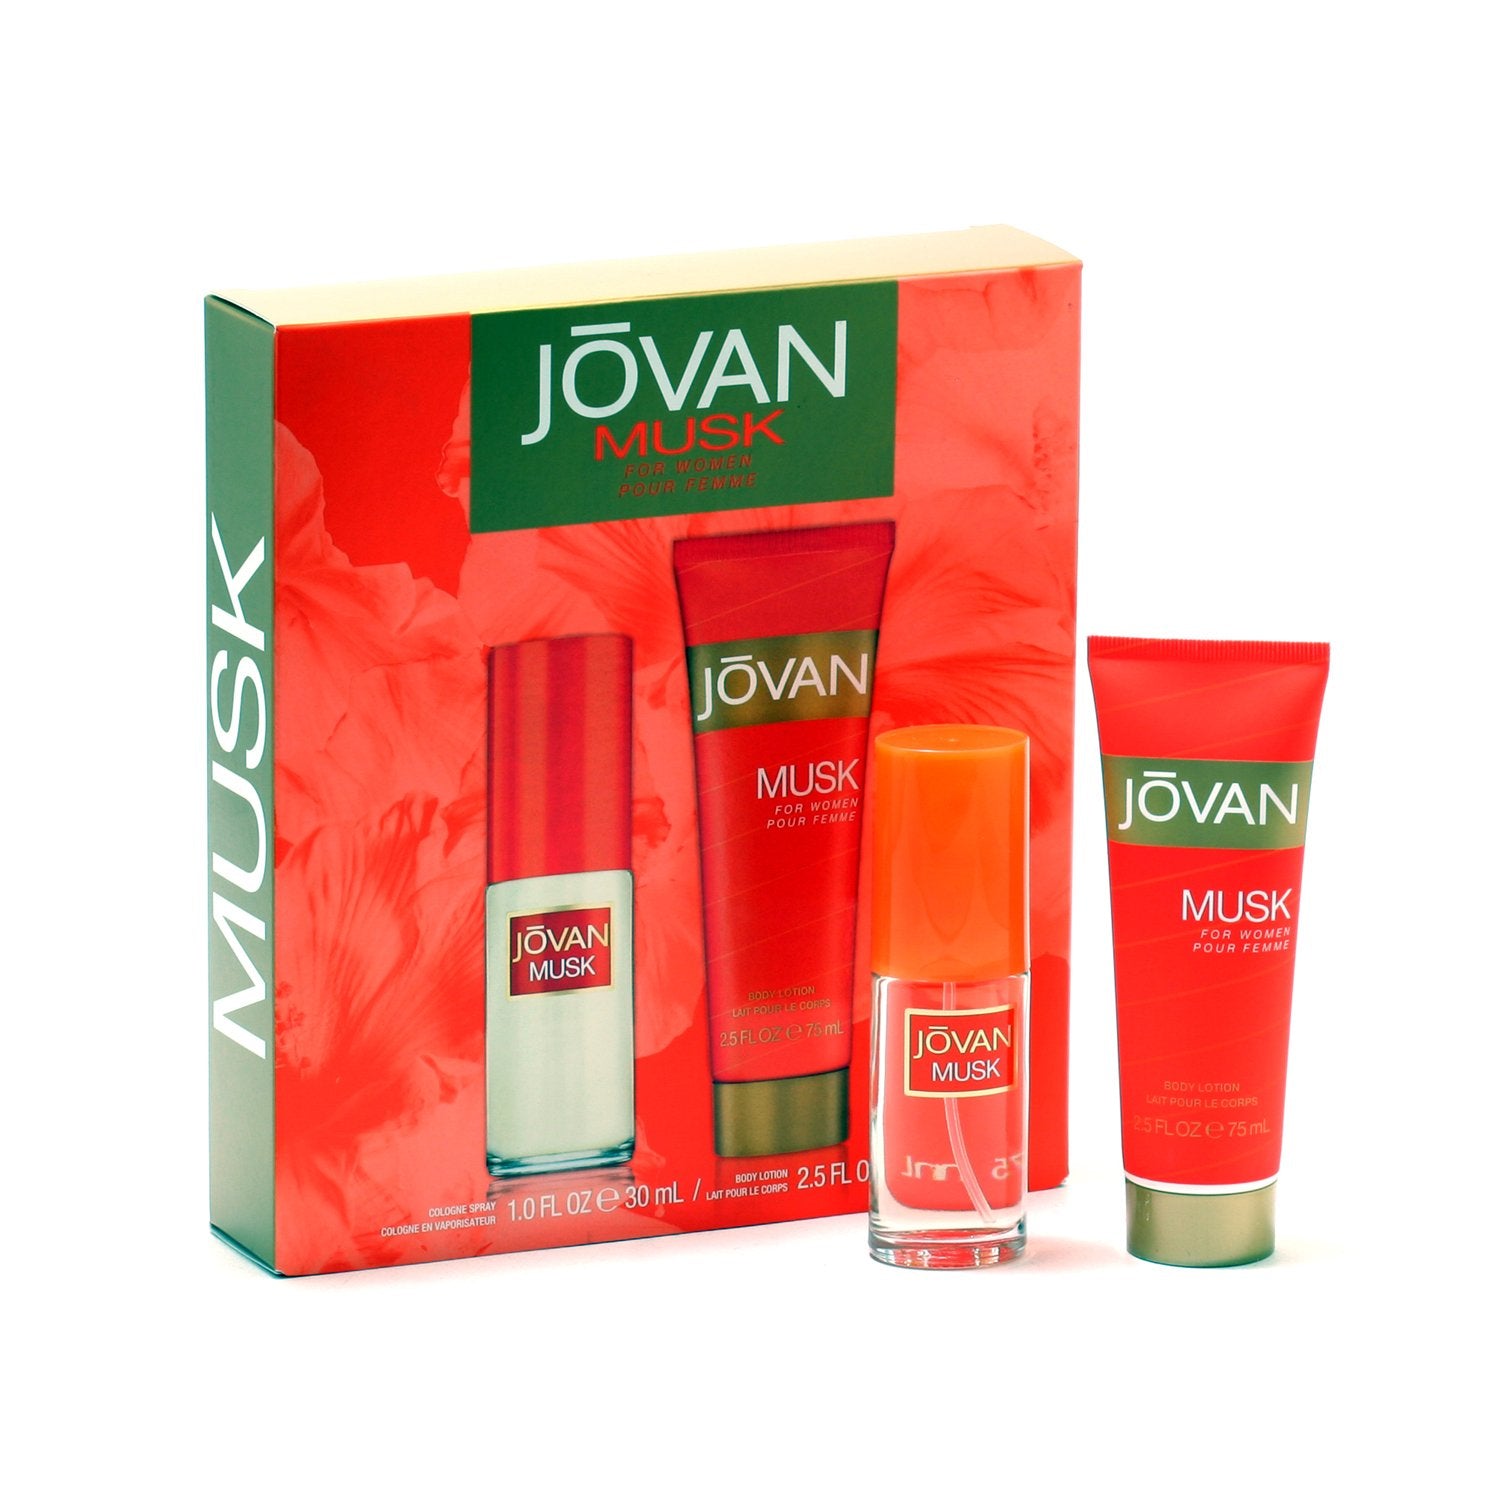 Perfume Sets - JOVAN MUSK FOR WOMEN - COLOGNE AND LOTION GIFT SET